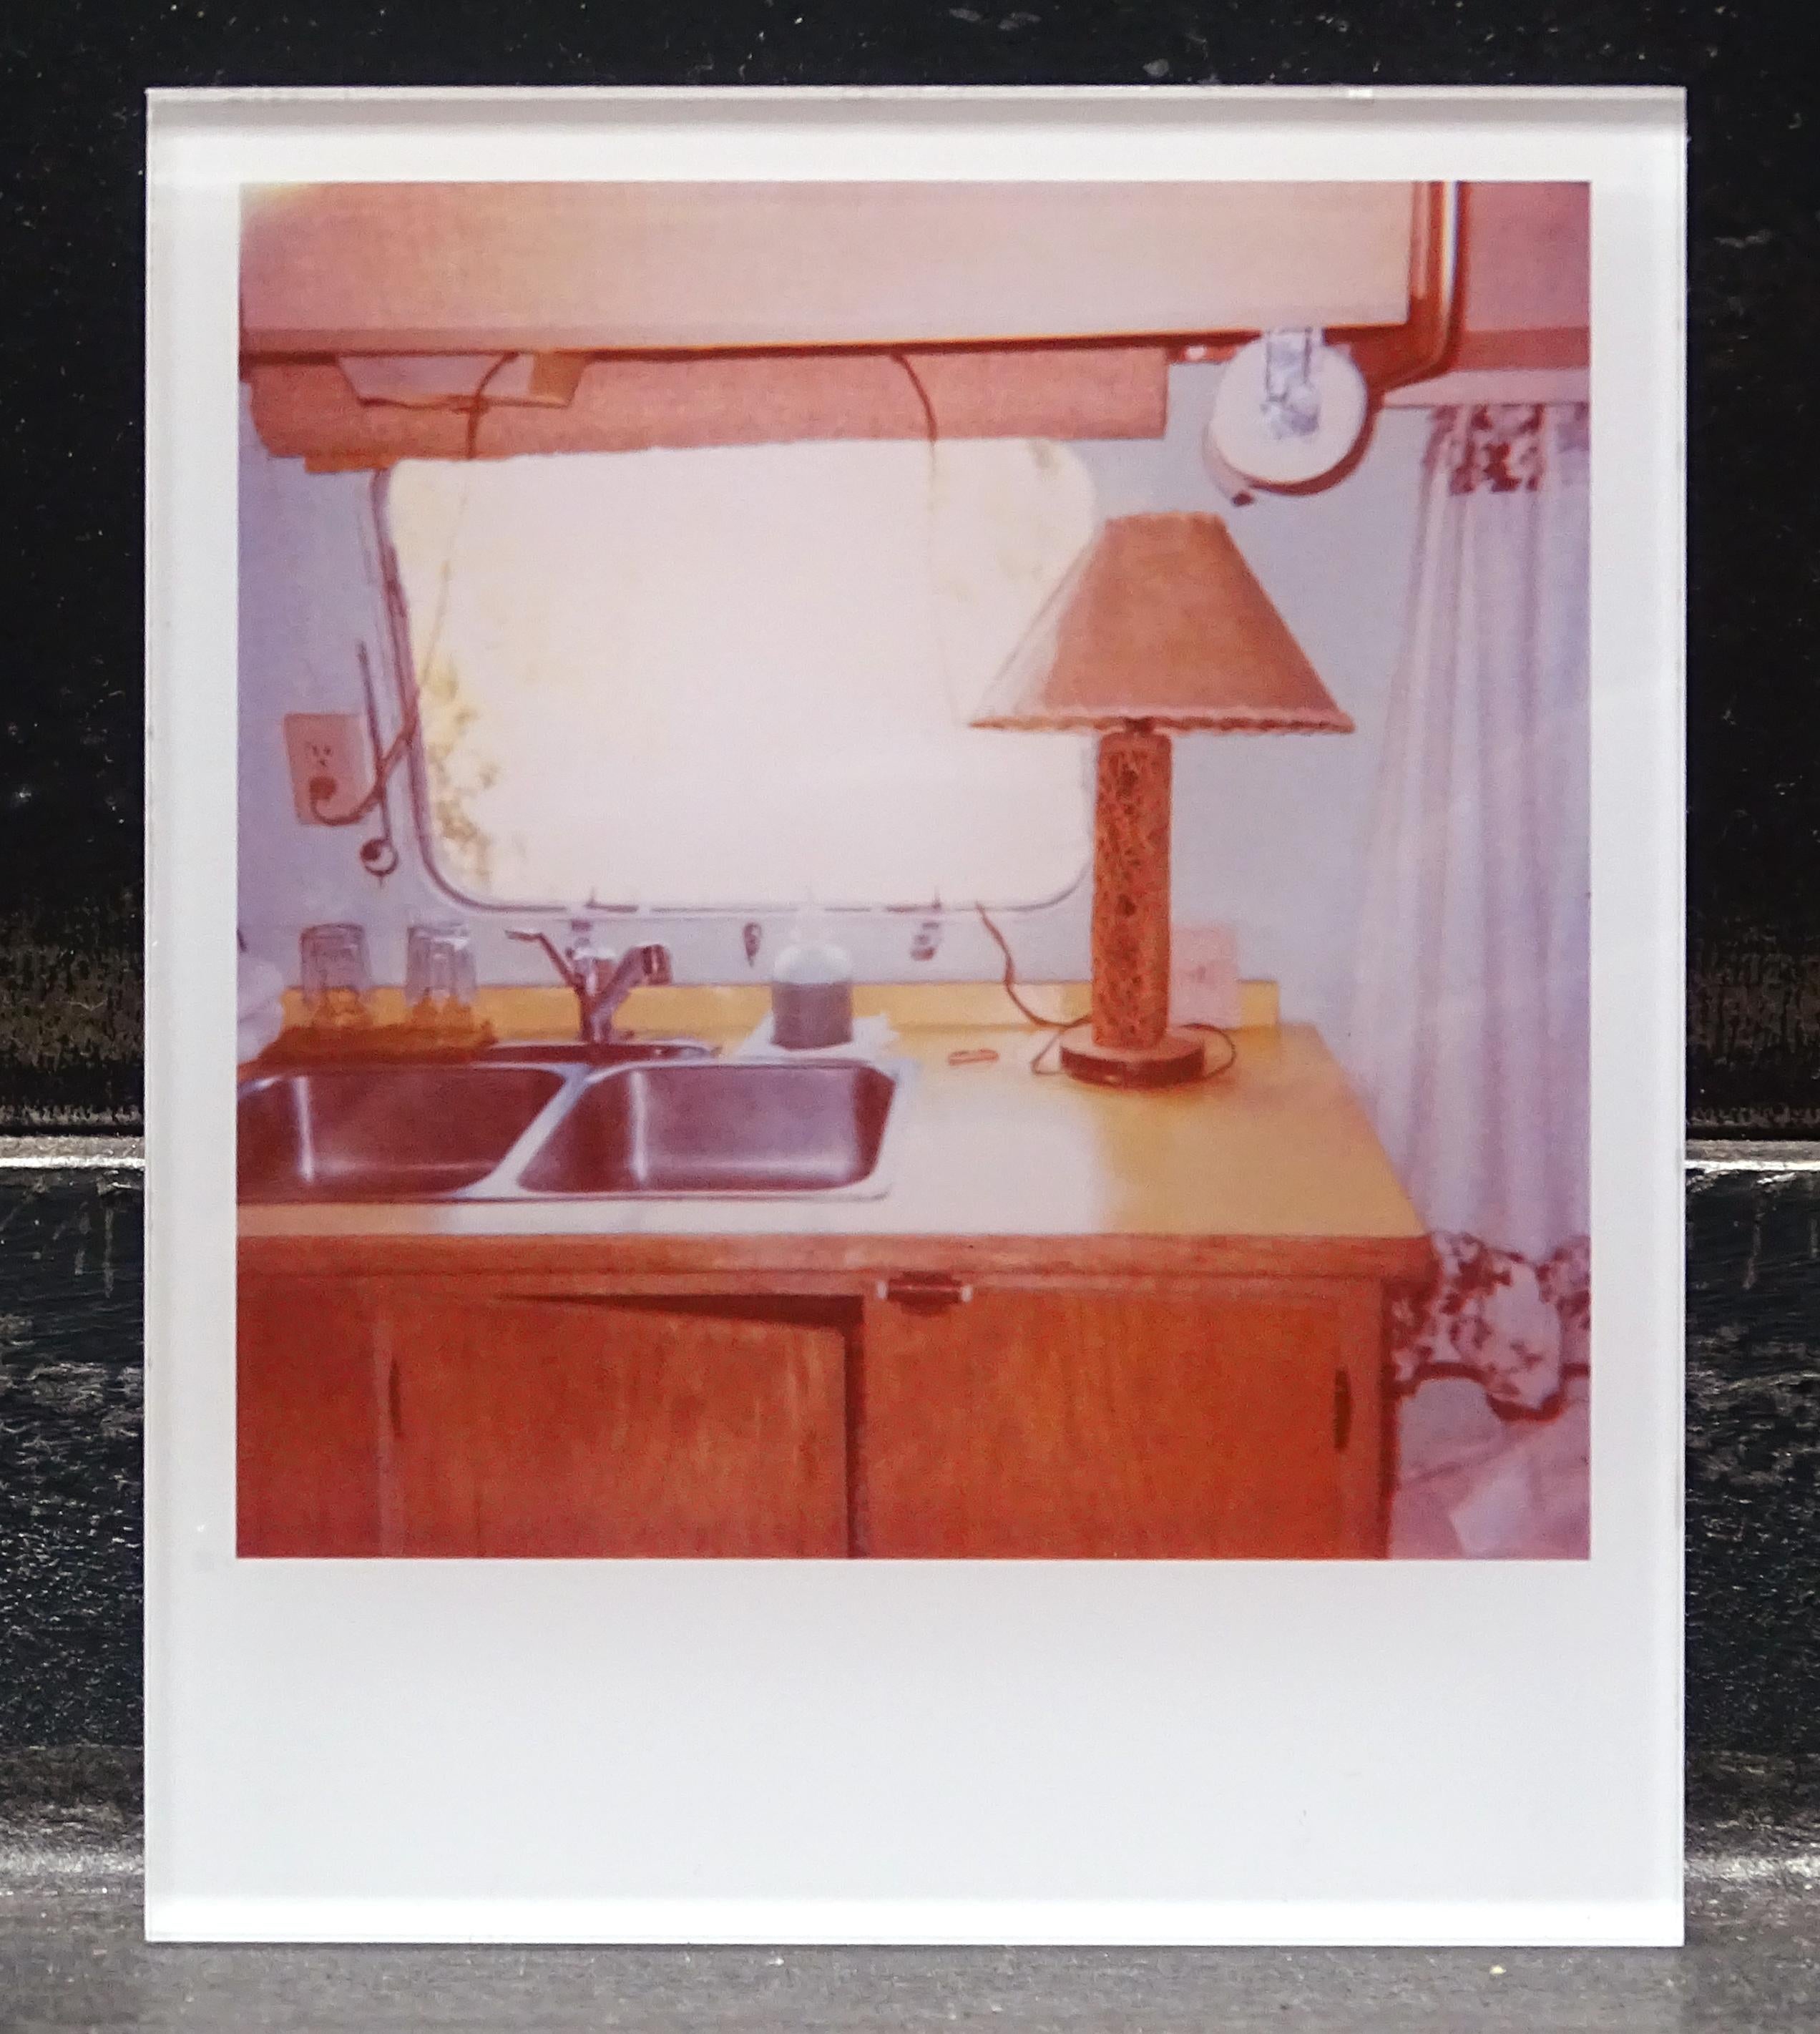 Stefanie Schneider's Minis
Airstream (Sidewinder), 2005

Signed and signature brand on verso.
Lambda digital Color Photographs based on a Polaroid.
Sandwiched in between Plexiglass (thickness 0.7cm)

Polaroid sized open Editions 1999-2013
10.7 x